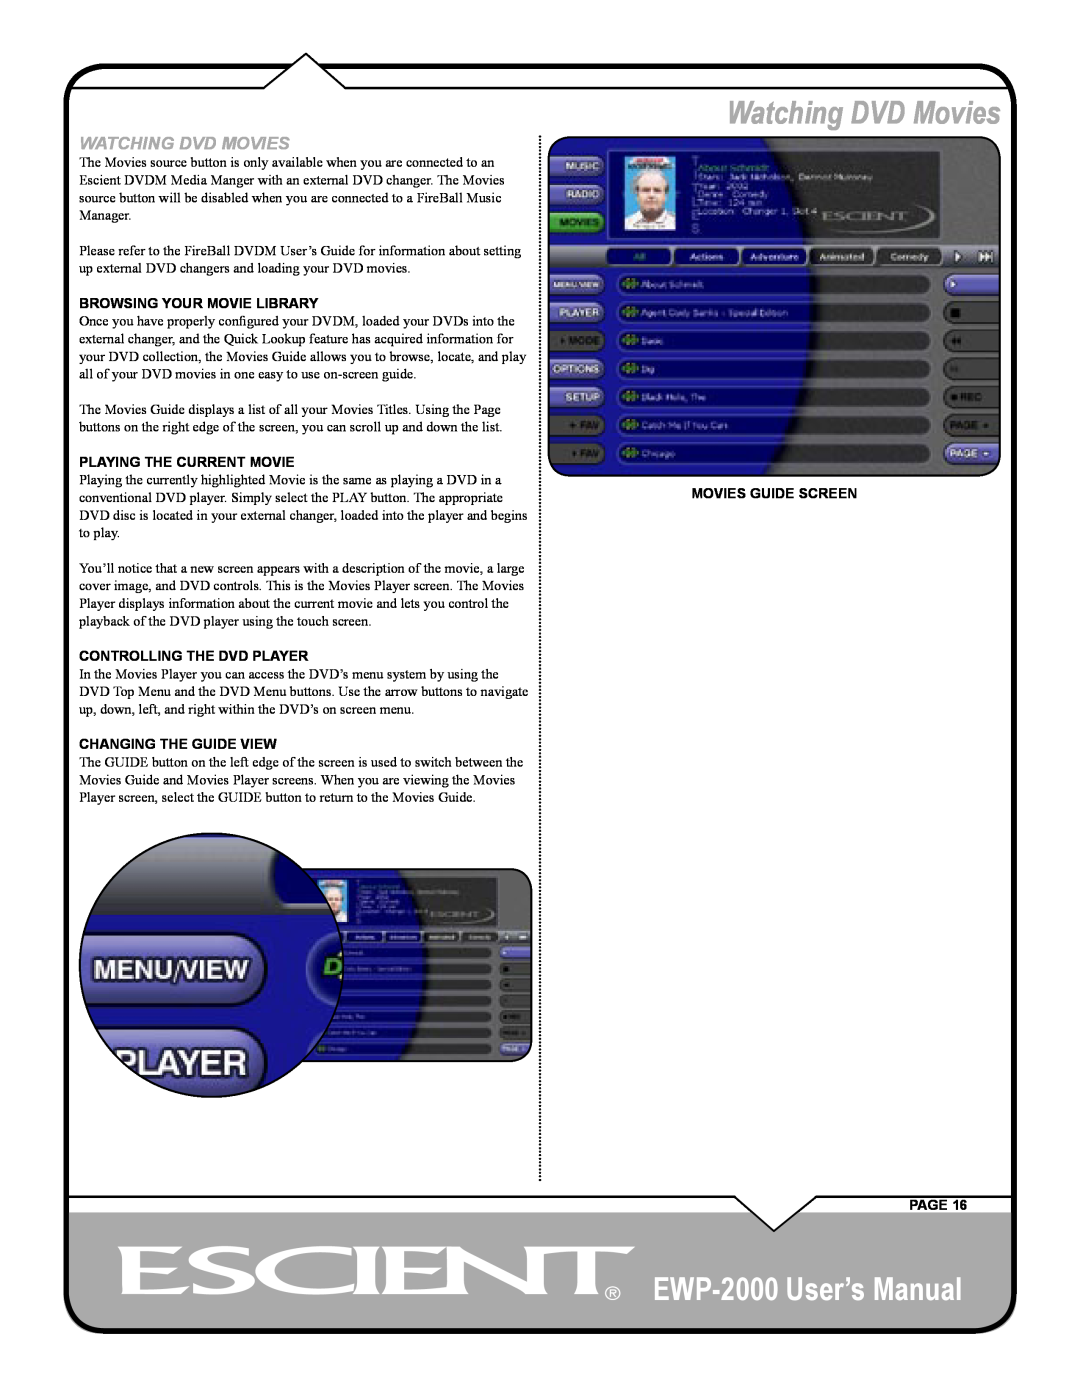 Escient user manual EWP-2000 User’s Manual, Watching DVD Movies, Browsing Your Movie Library, Playing The Current Movie 